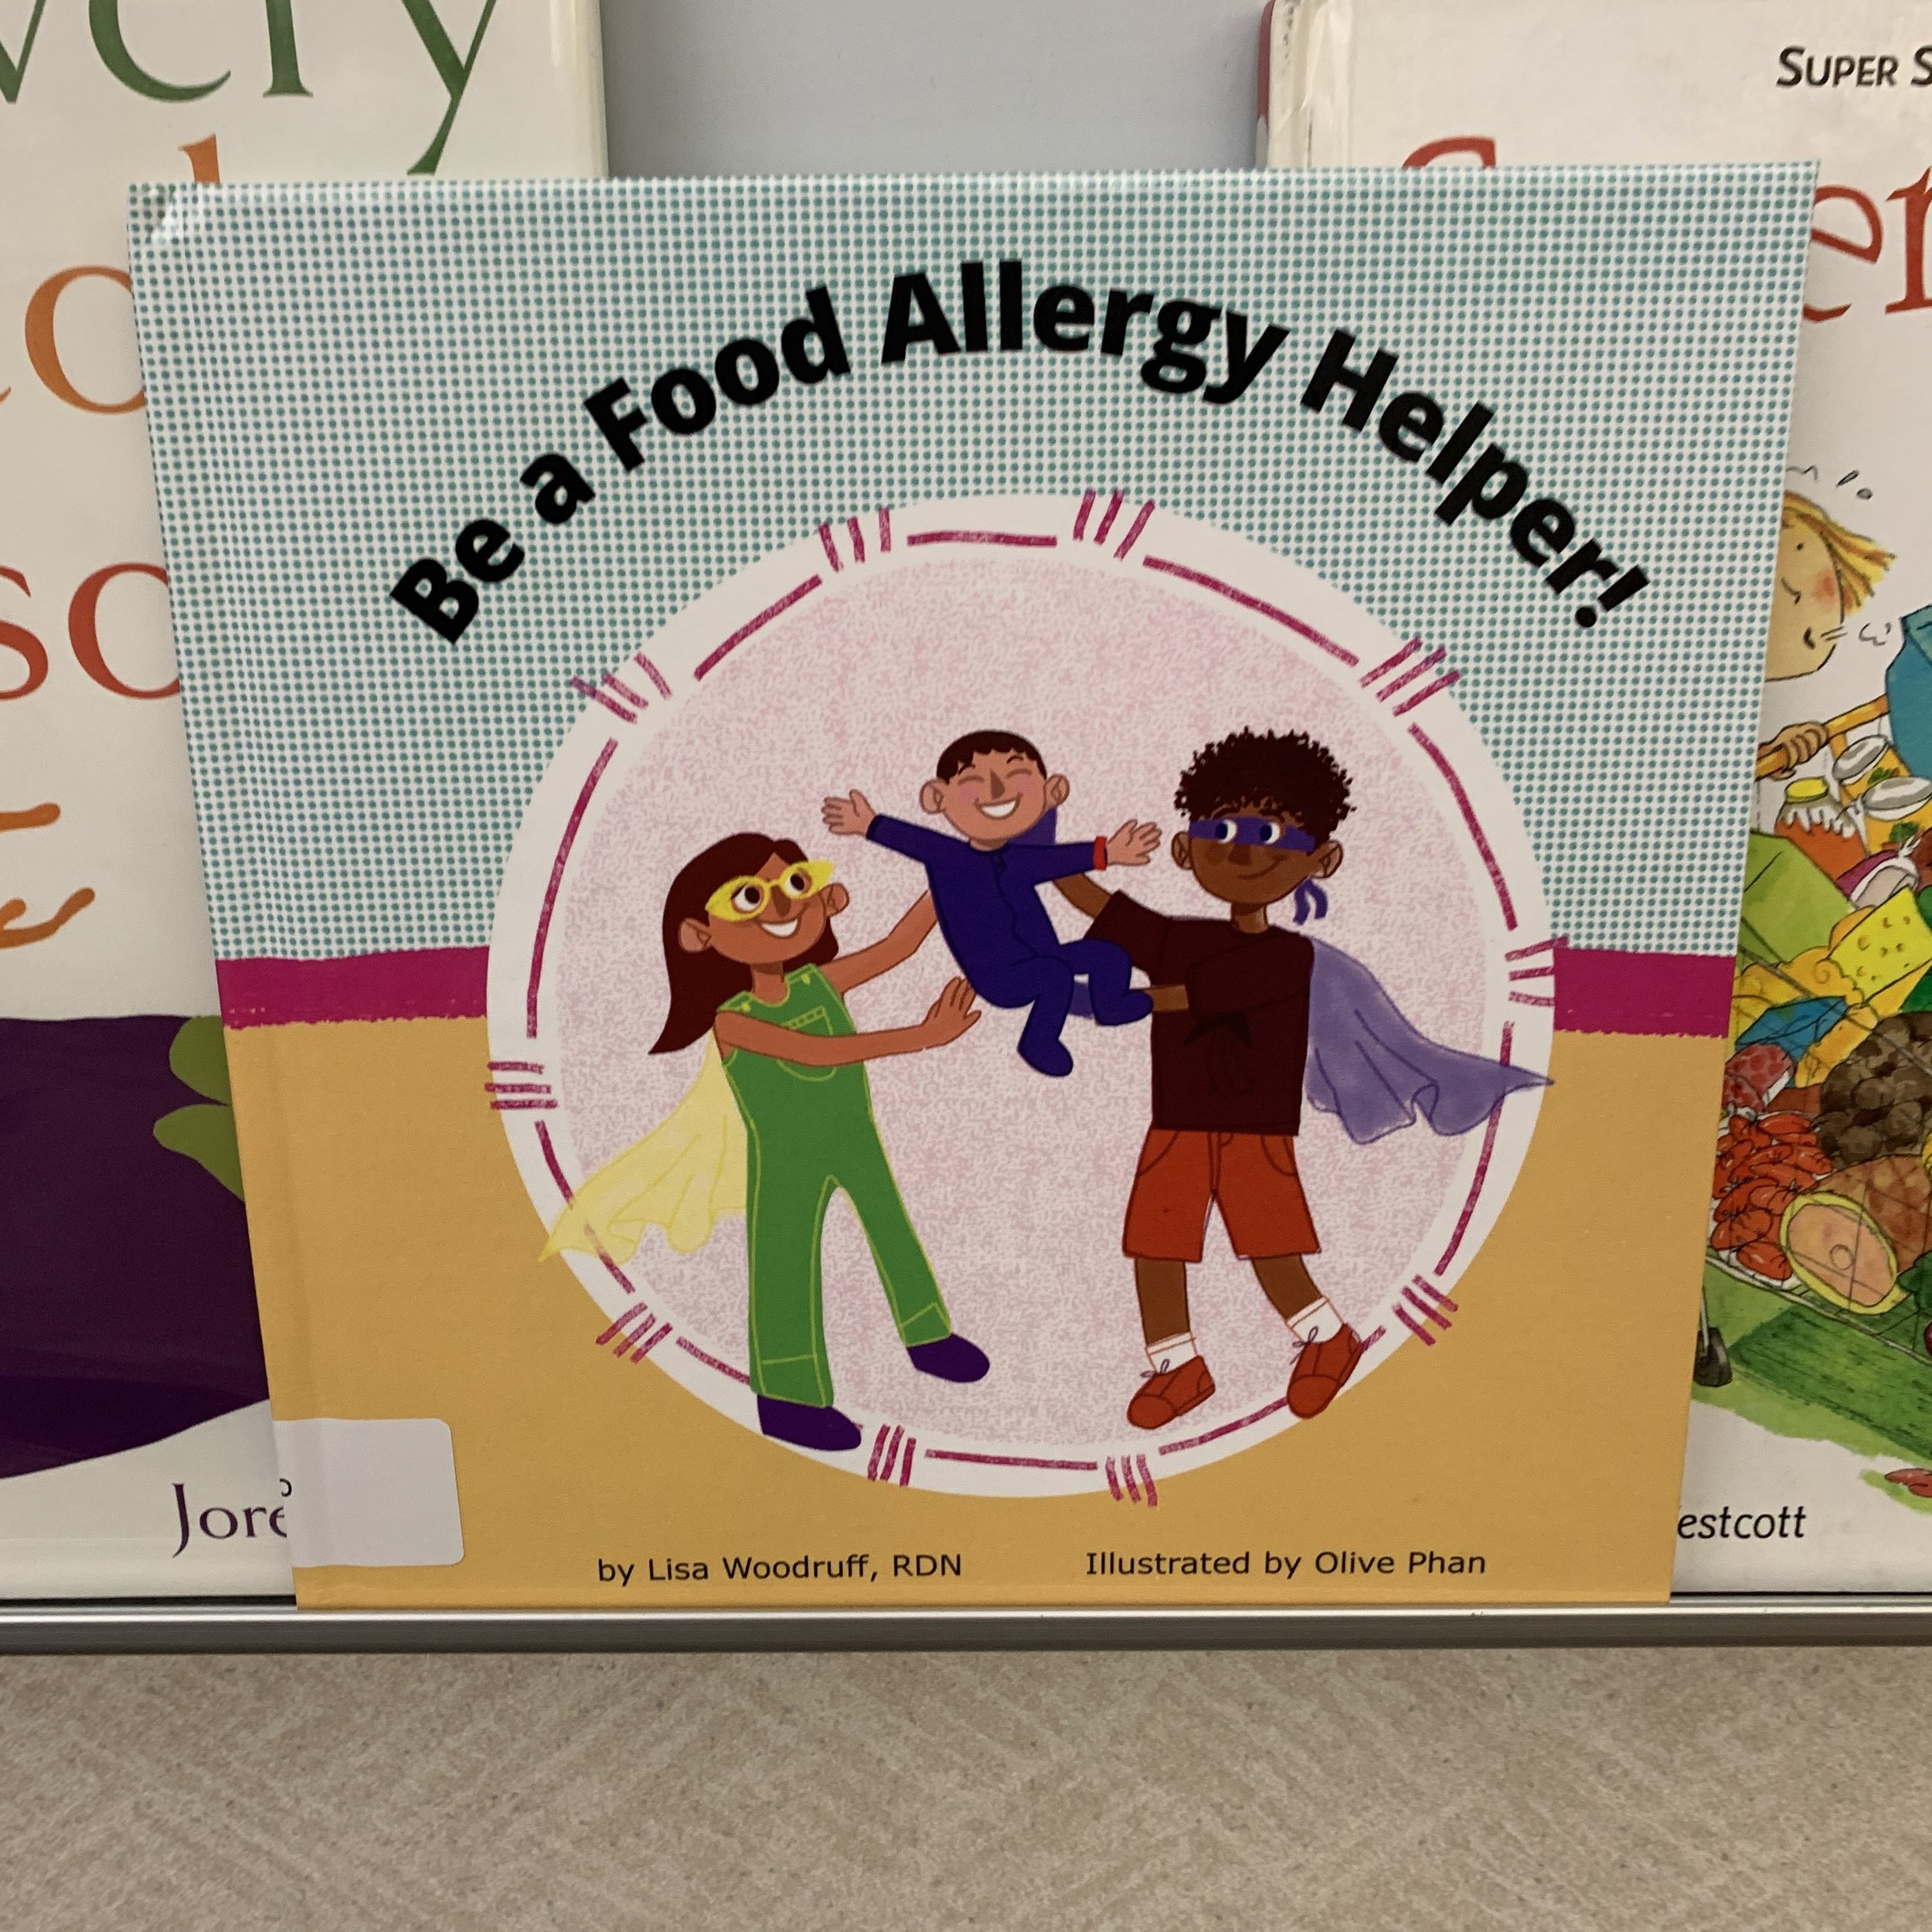 A copy of Be a Food Allergy Helper! is available to checkout at both the Cedar Falls, Iowa and Waverly, Iowa libraries. Go check it out!